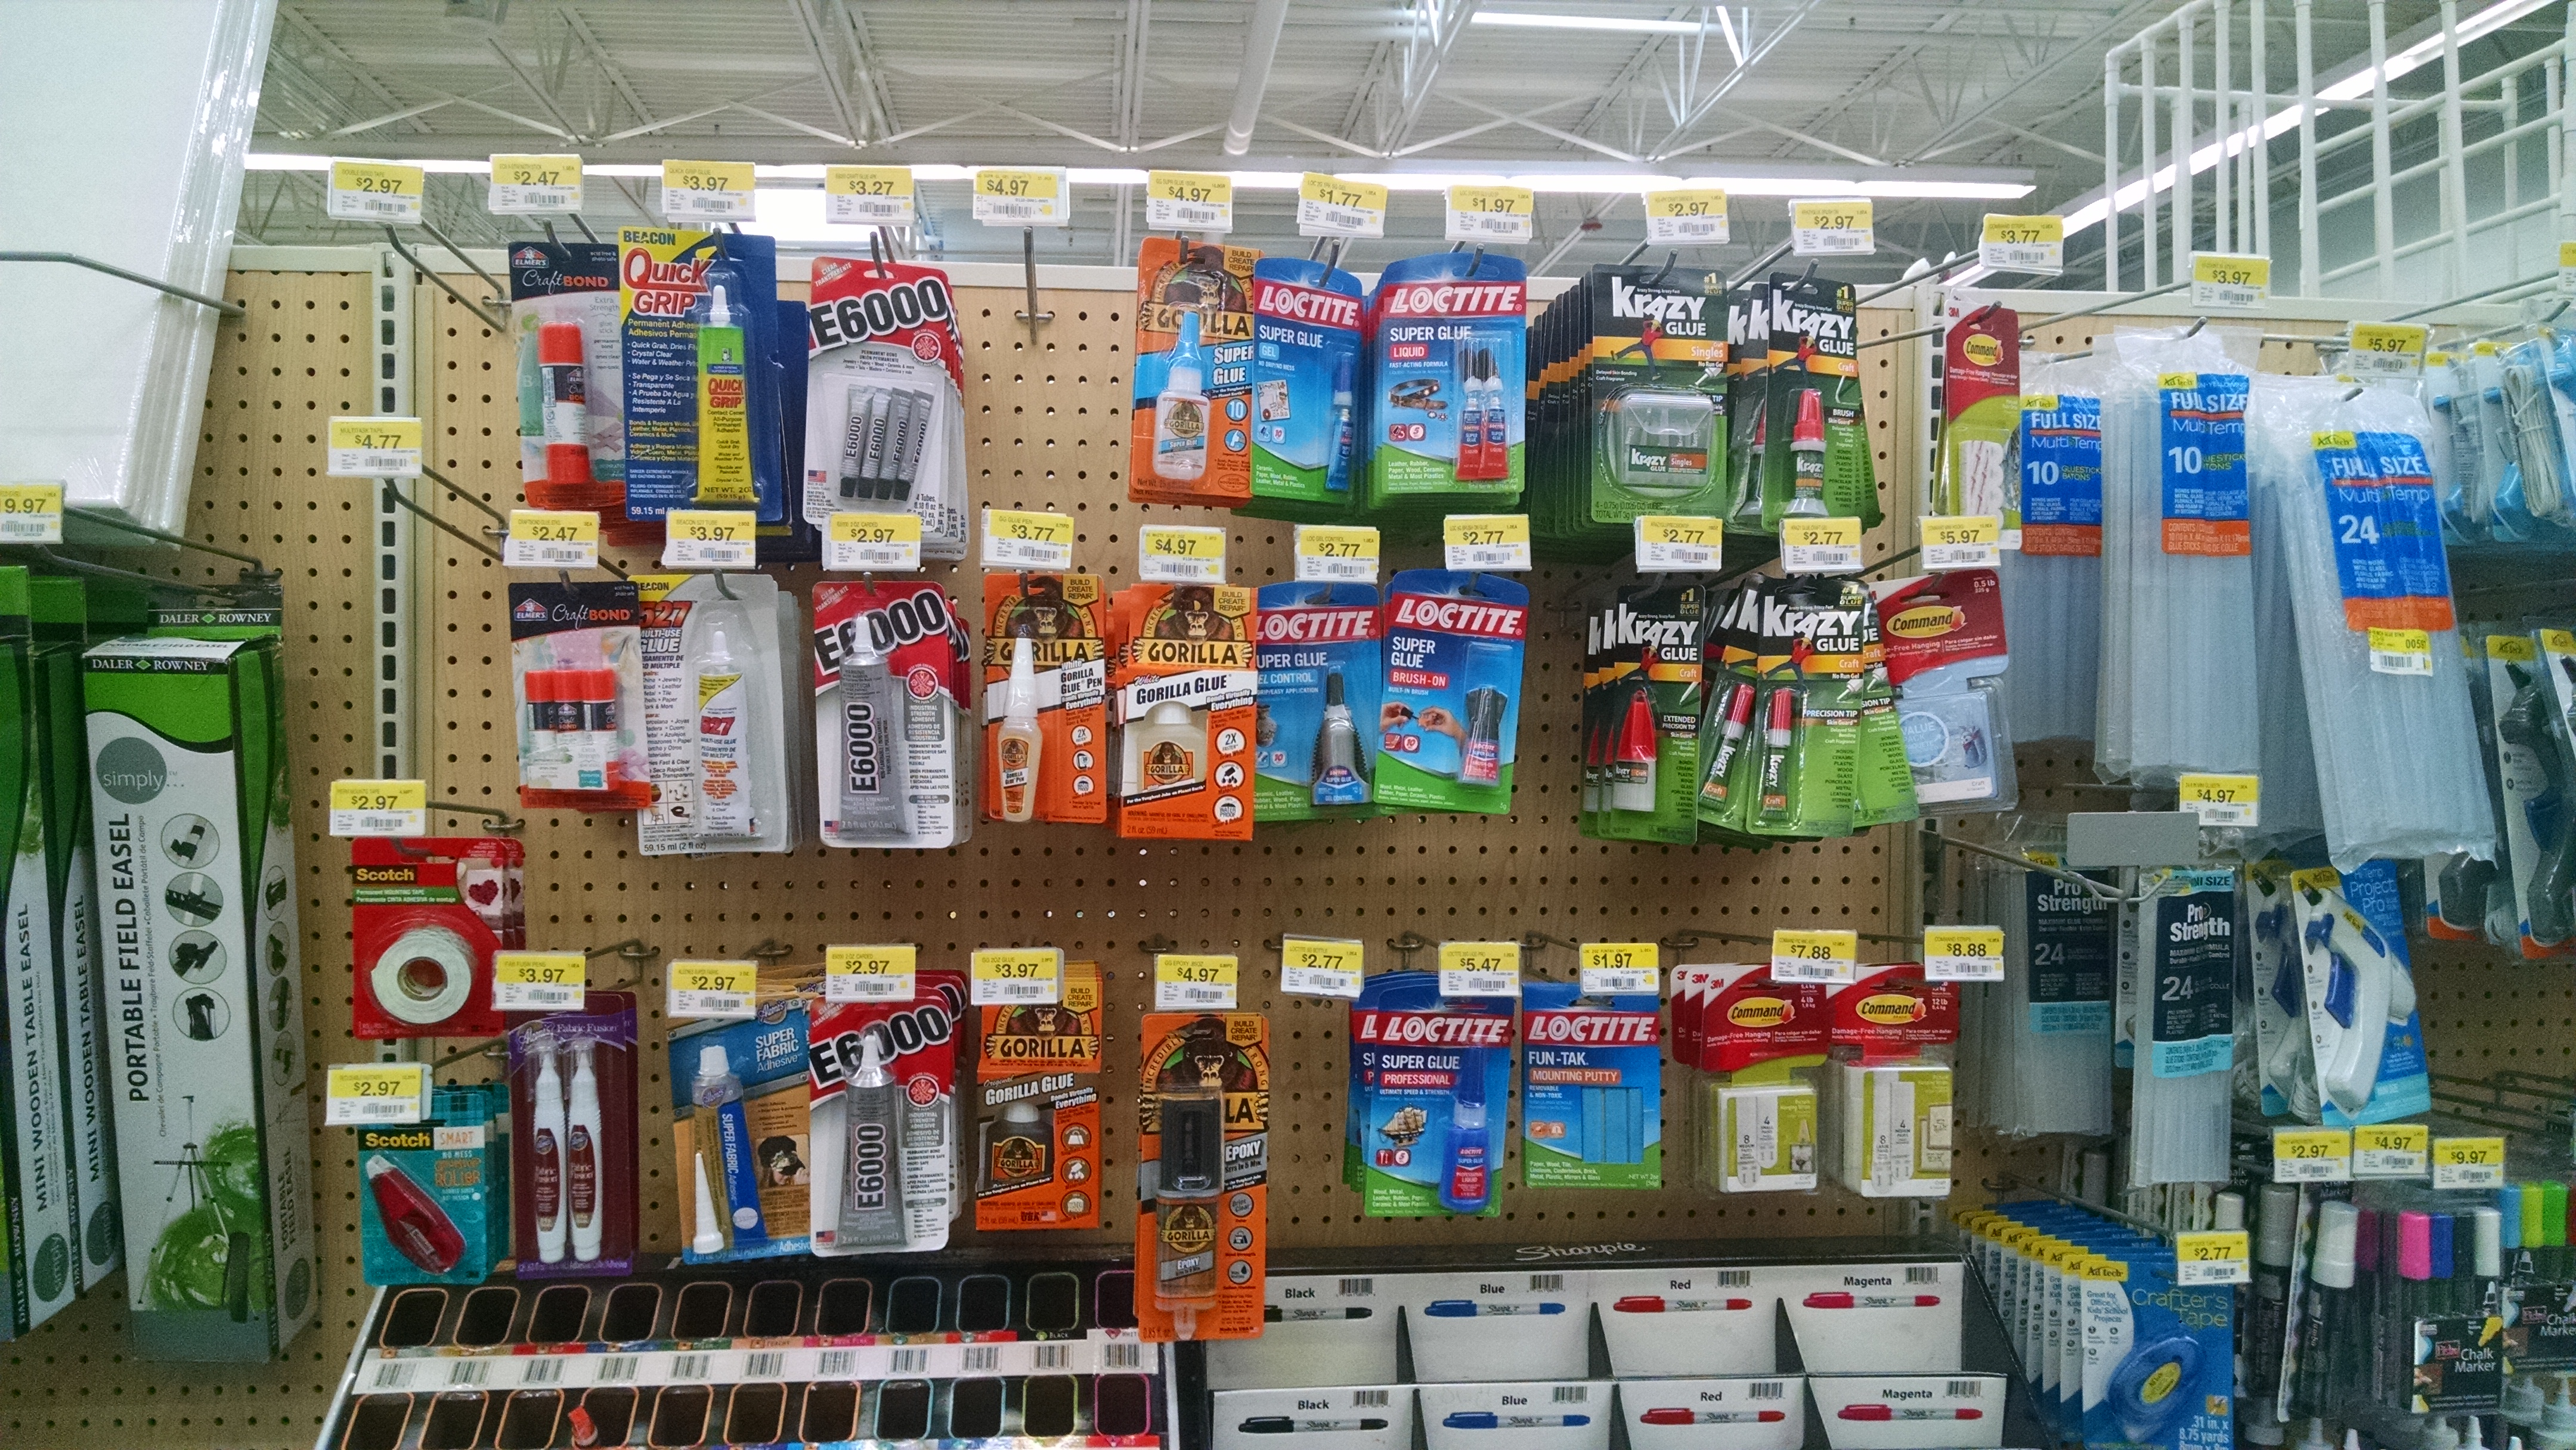 Command and Scotch products at Walmart